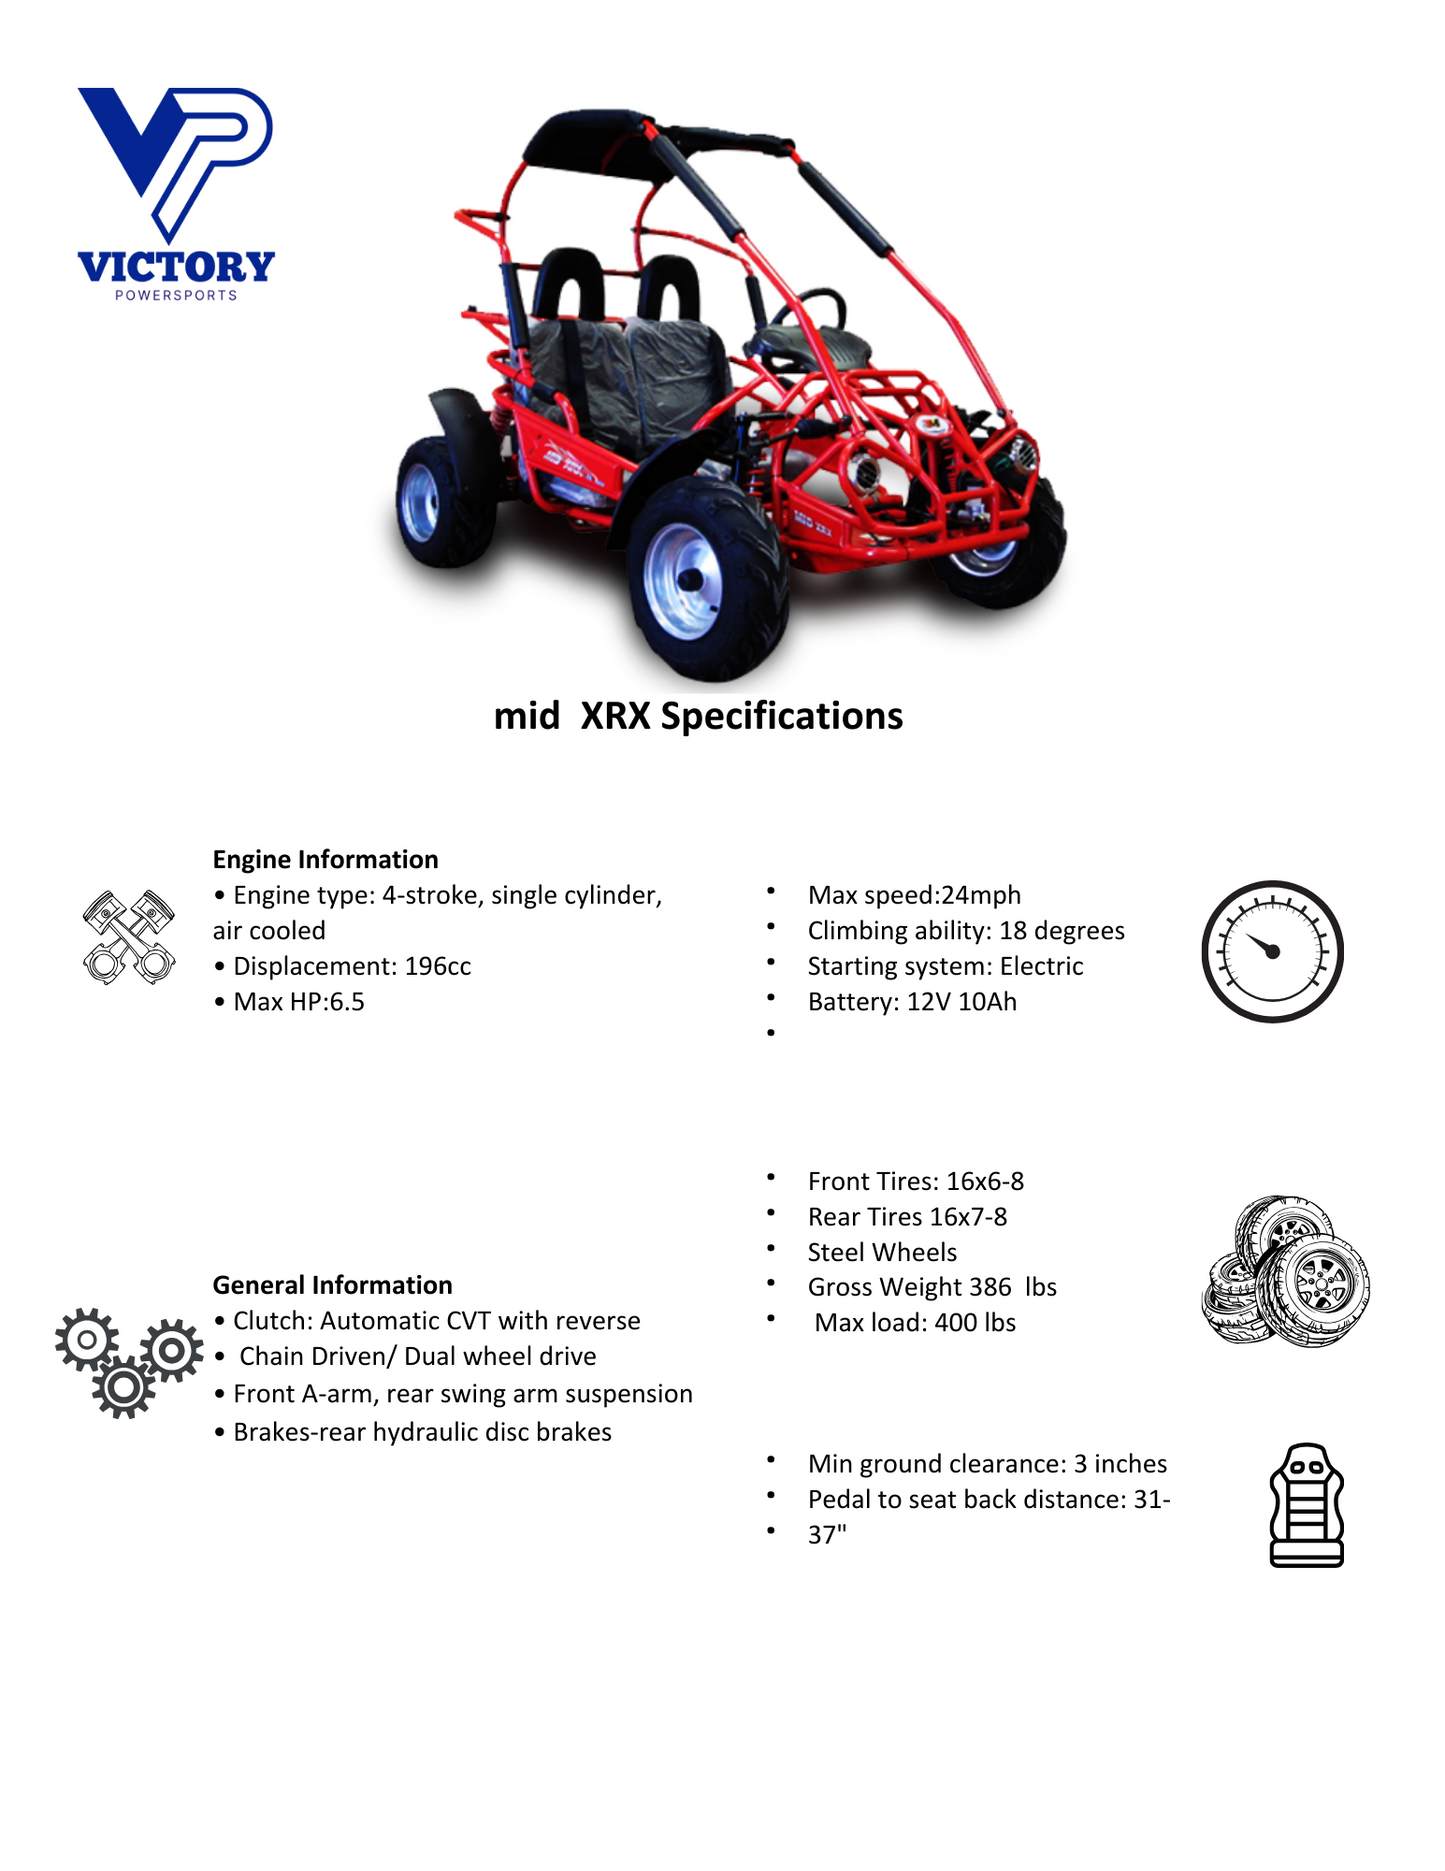 Trailmaster Mid XRX-R, best prices at Victory Powersports